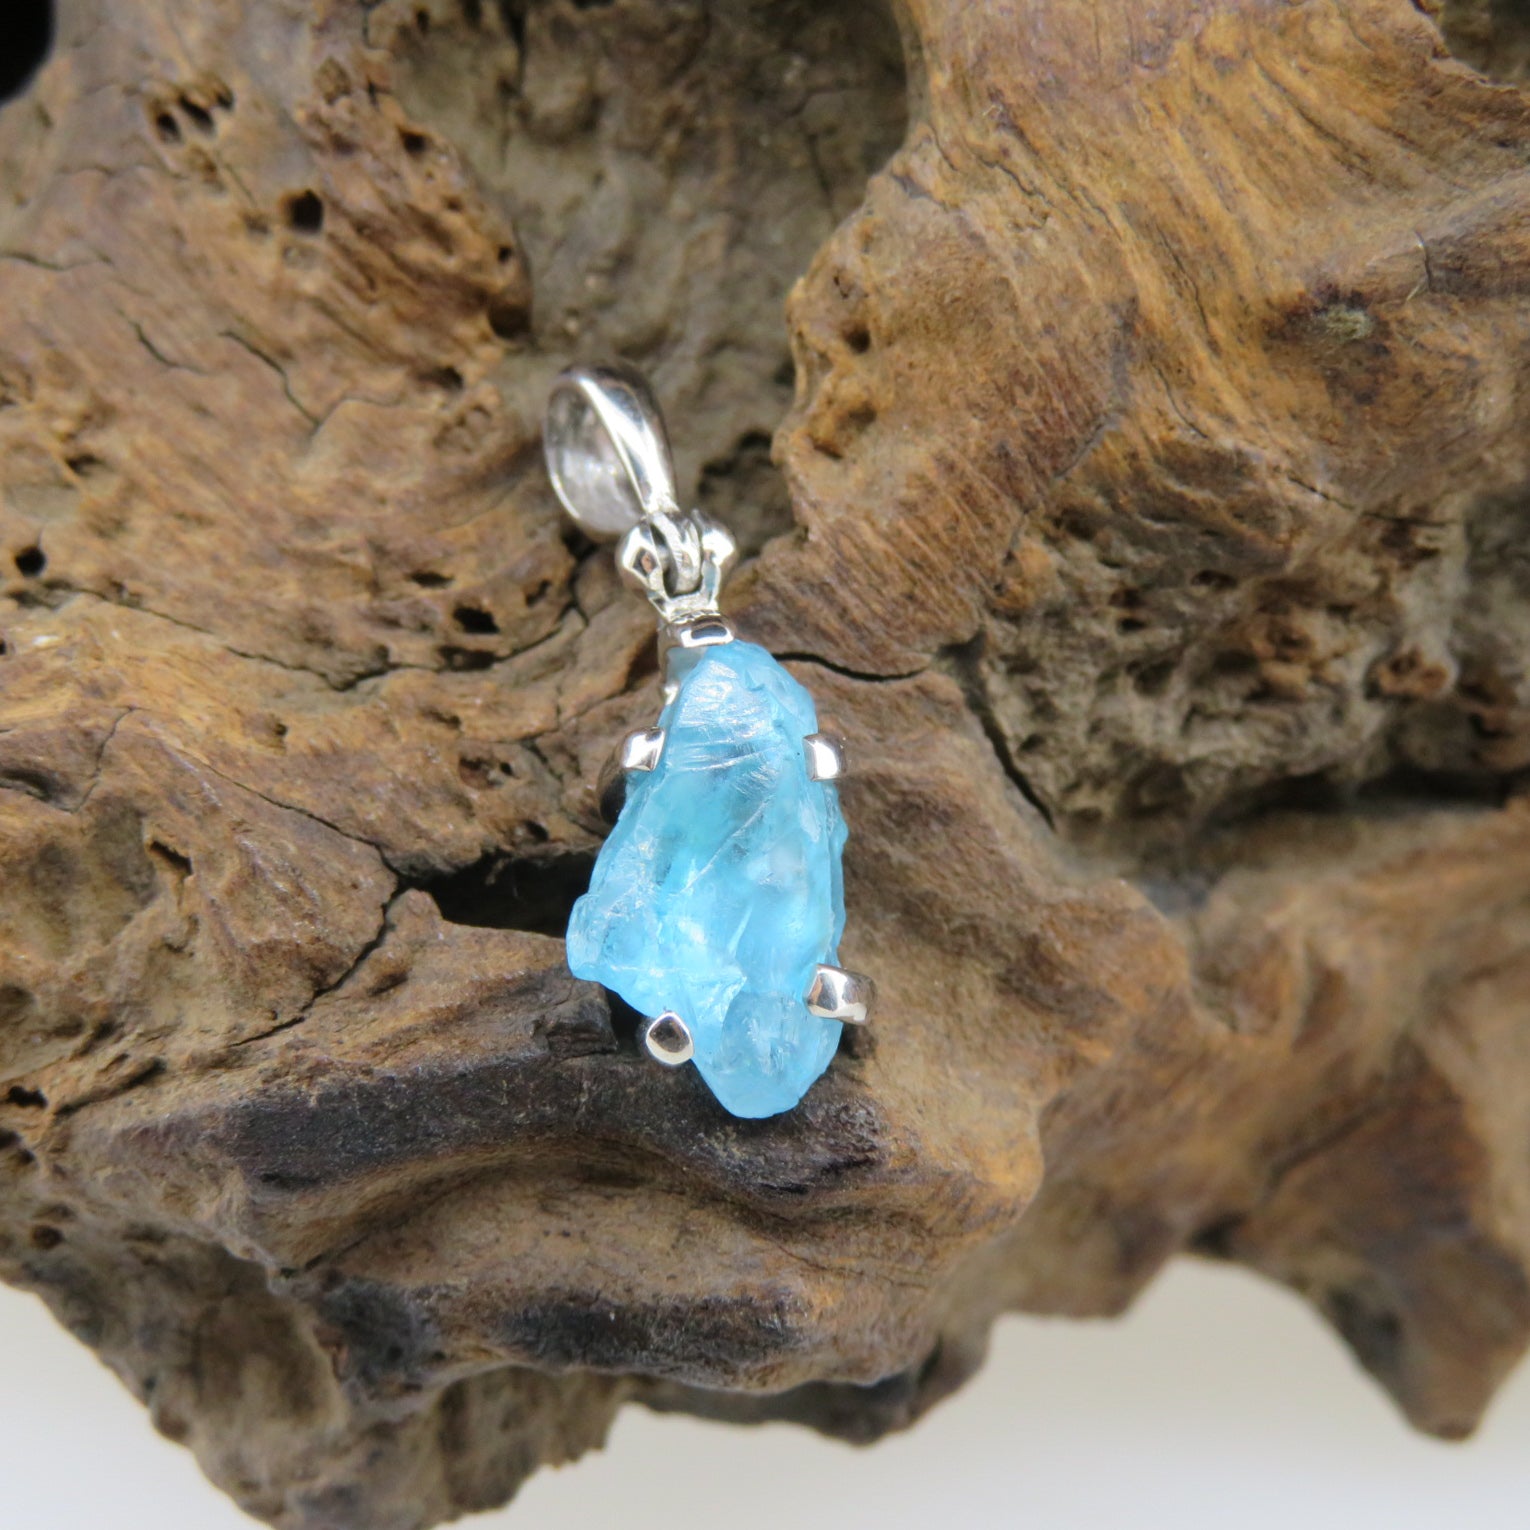 Blue Apatite Pendant with Sterling Silver